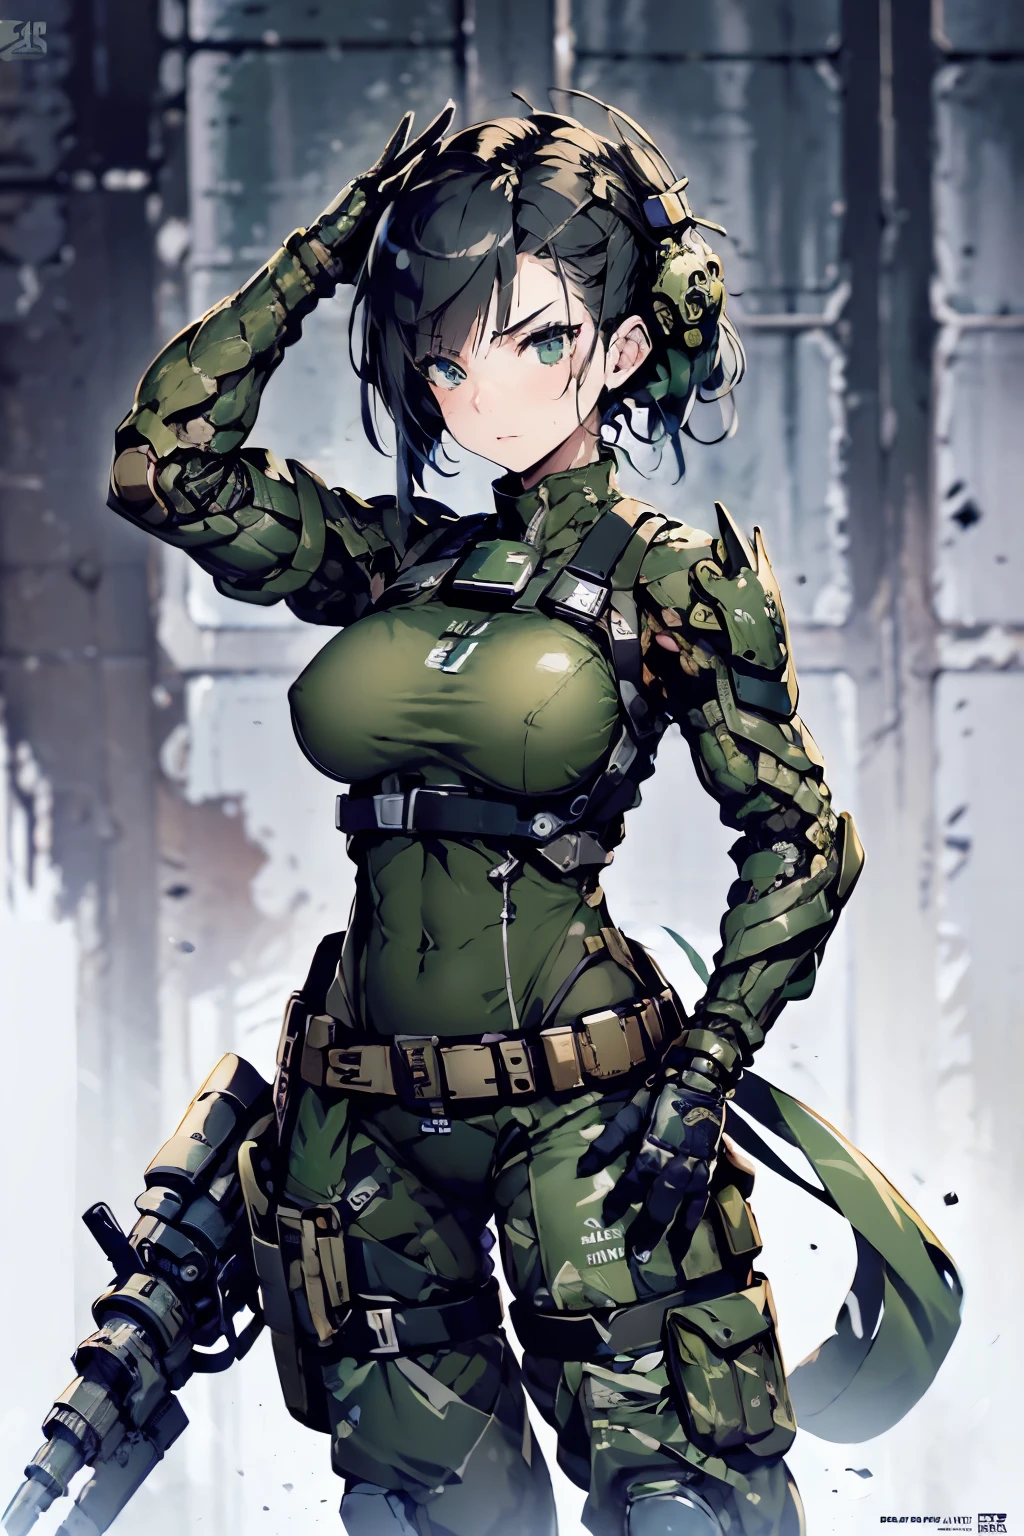 Beautiful female soldier in a green uniform holding a gun, tattered military gear, mechanized soldier girl, oversized mechanical exoskeleton arms and legs, inspired by Masamune Shirow, girl in mecha armor, mechanized valkyrie girl, cushart kenz, infantry girl, Bare Skin, Athletic Well Toned Body, sweaty skin, Barely Clothed, cammo patterns, Beautiful Face, dieselpunk Theme, Fiverr Dnd Character, Octane Render, Digital Art, Extreme Detail, 4k, Ultra Hd, Polished, Beautiful, Hyperdetailed, Intricate, Elaborate, Meticulous, Photorealistic, Sharp Focus, Wlop, Character Design, Unreal Engine, 3d Rendered, Volumetric Lighting, Reflections, Glossy, Digital Illustration, Pose, Suggestive Pose, Lewd, Full Body Shot, naked, nude, uncovered breasts, exposed breasts, exposed crotch, vissible nipples, puffy vagina, anatomically correct 💖❤💕💋